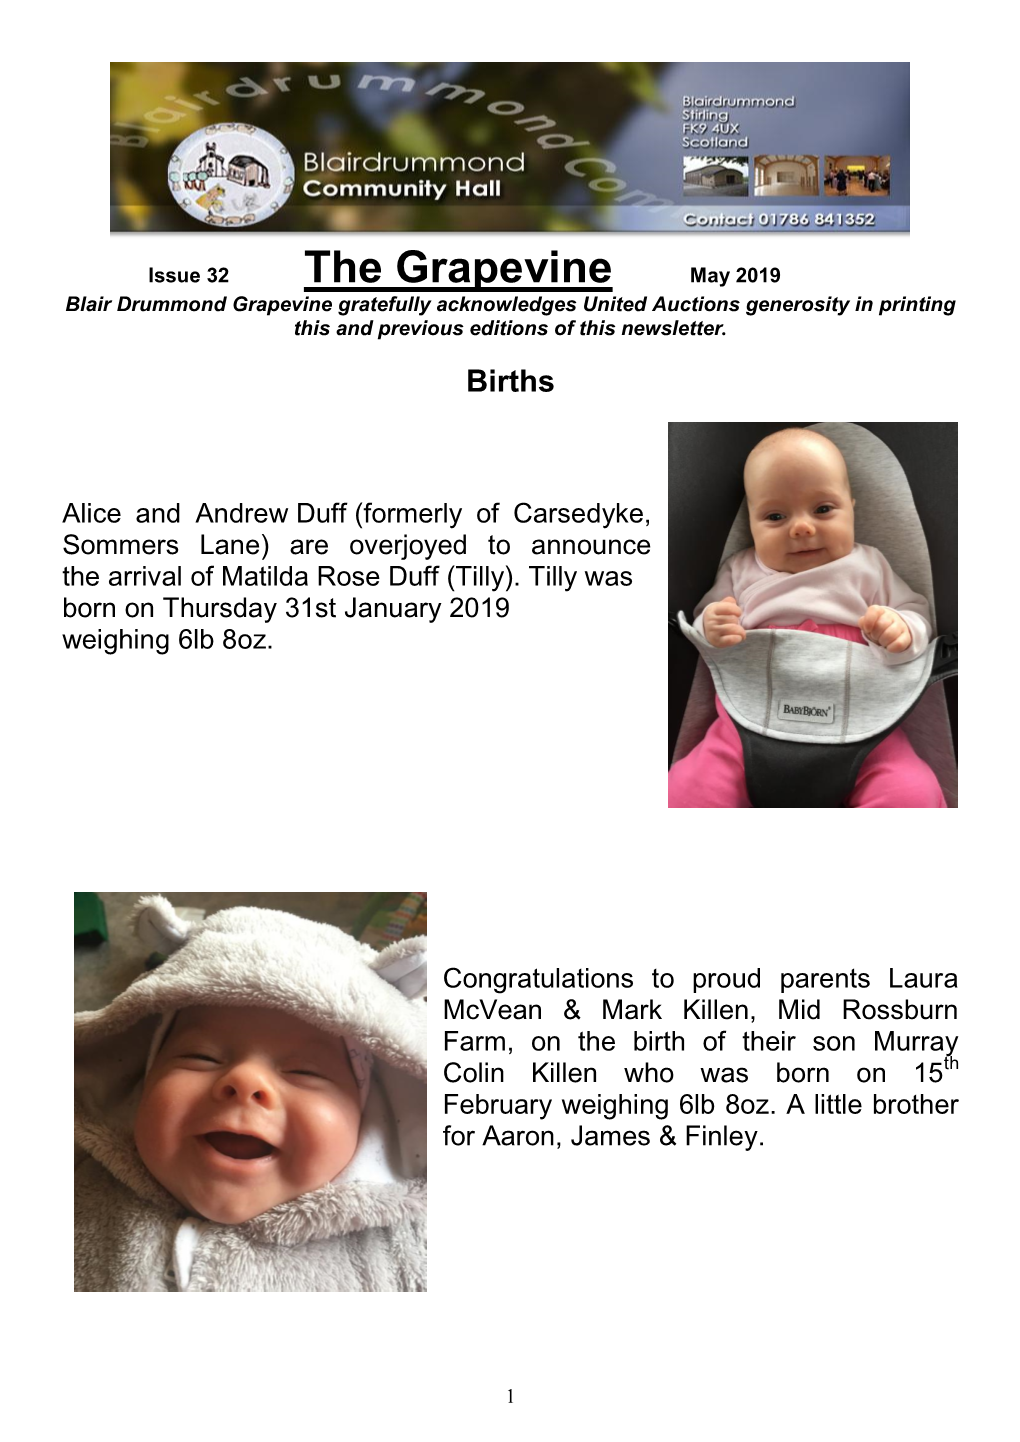 The Grapevine May 2019 Blair Drummond Grapevine Gratefully Acknowledges United Auctions Generosity in Printing This and Previous Editions of This Newsletter